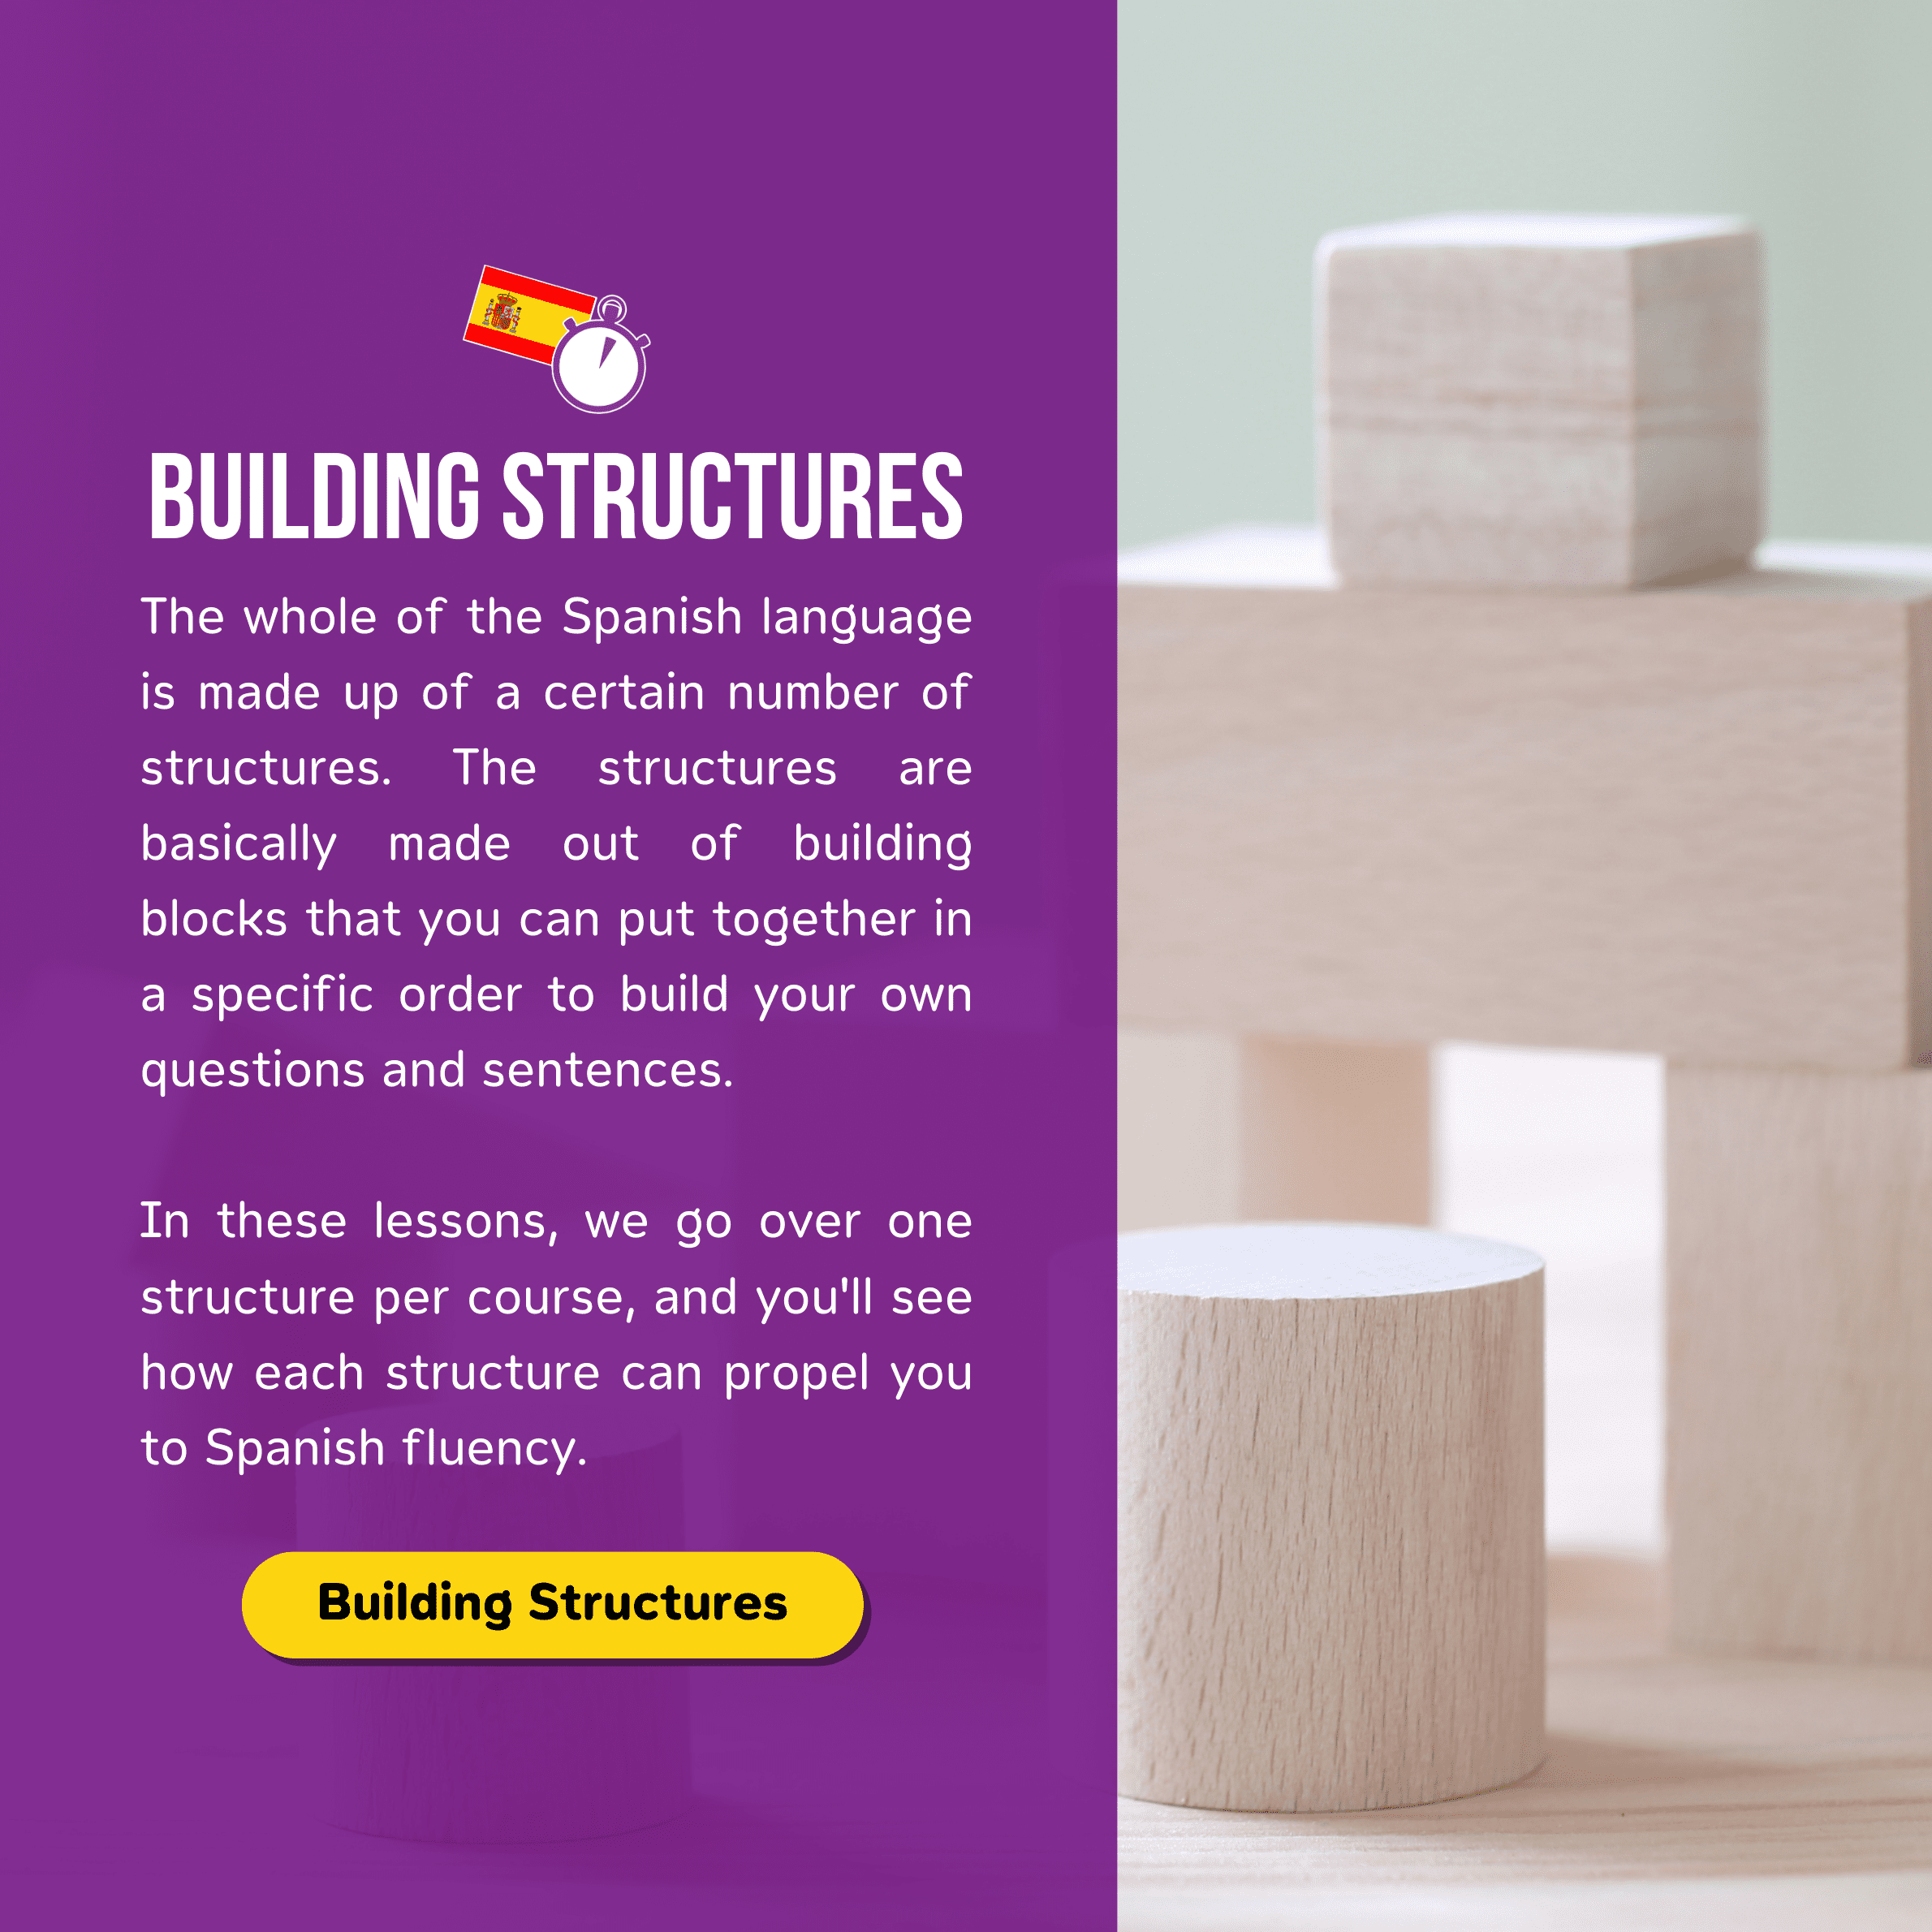 Building Structures in Spanish